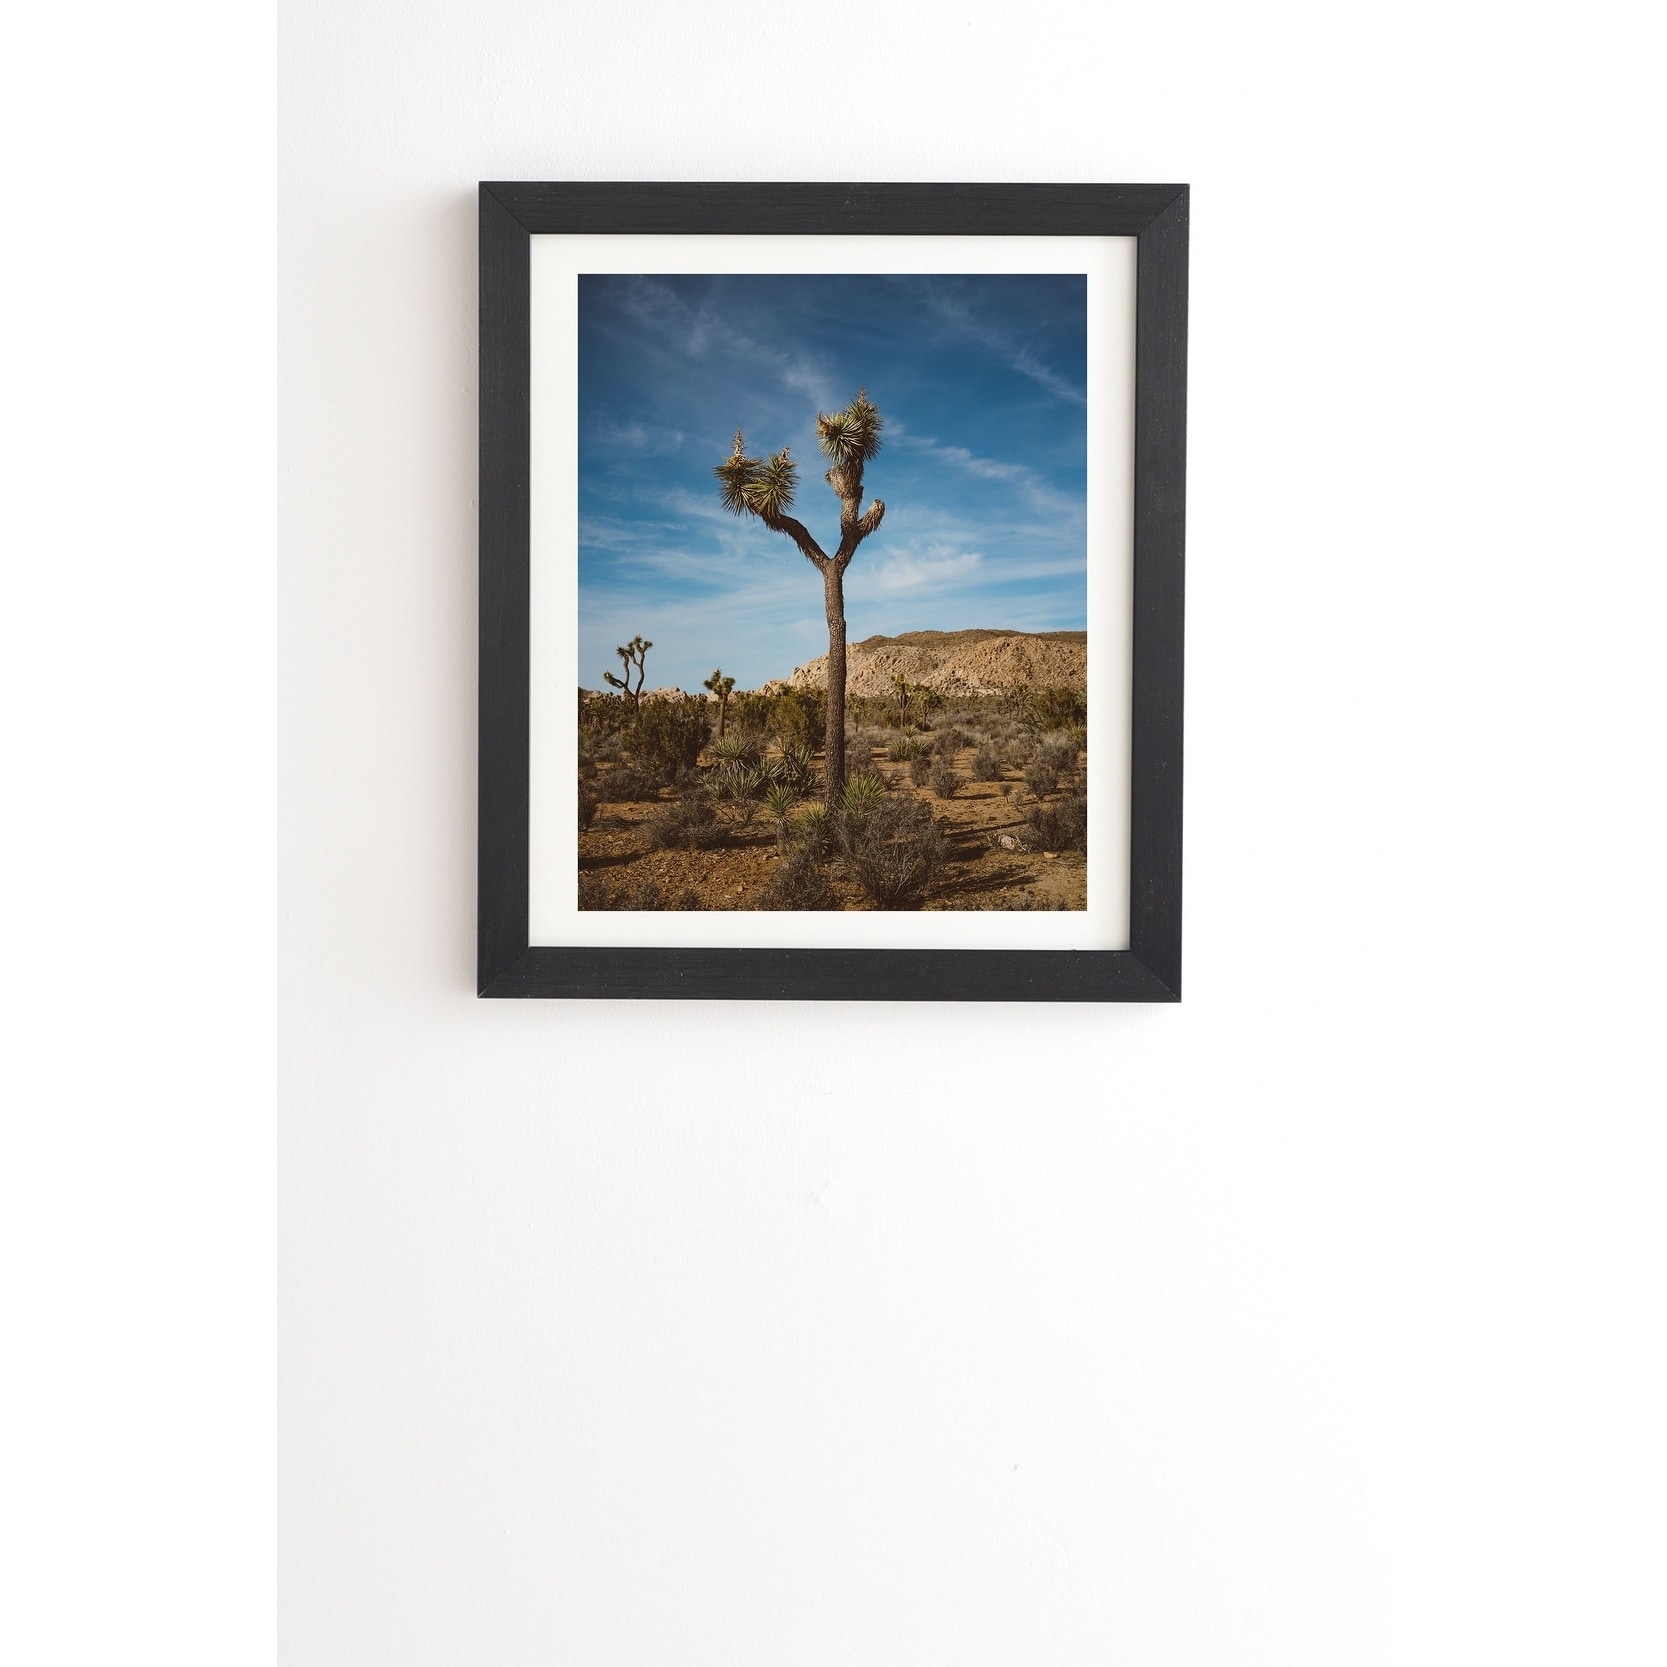 Shop Deny Designs Joshua Tree Framed Wall Art 3 Frame Colors Green Brown On Sale Free Shipping On Orders Over 45 Overstock 27177439